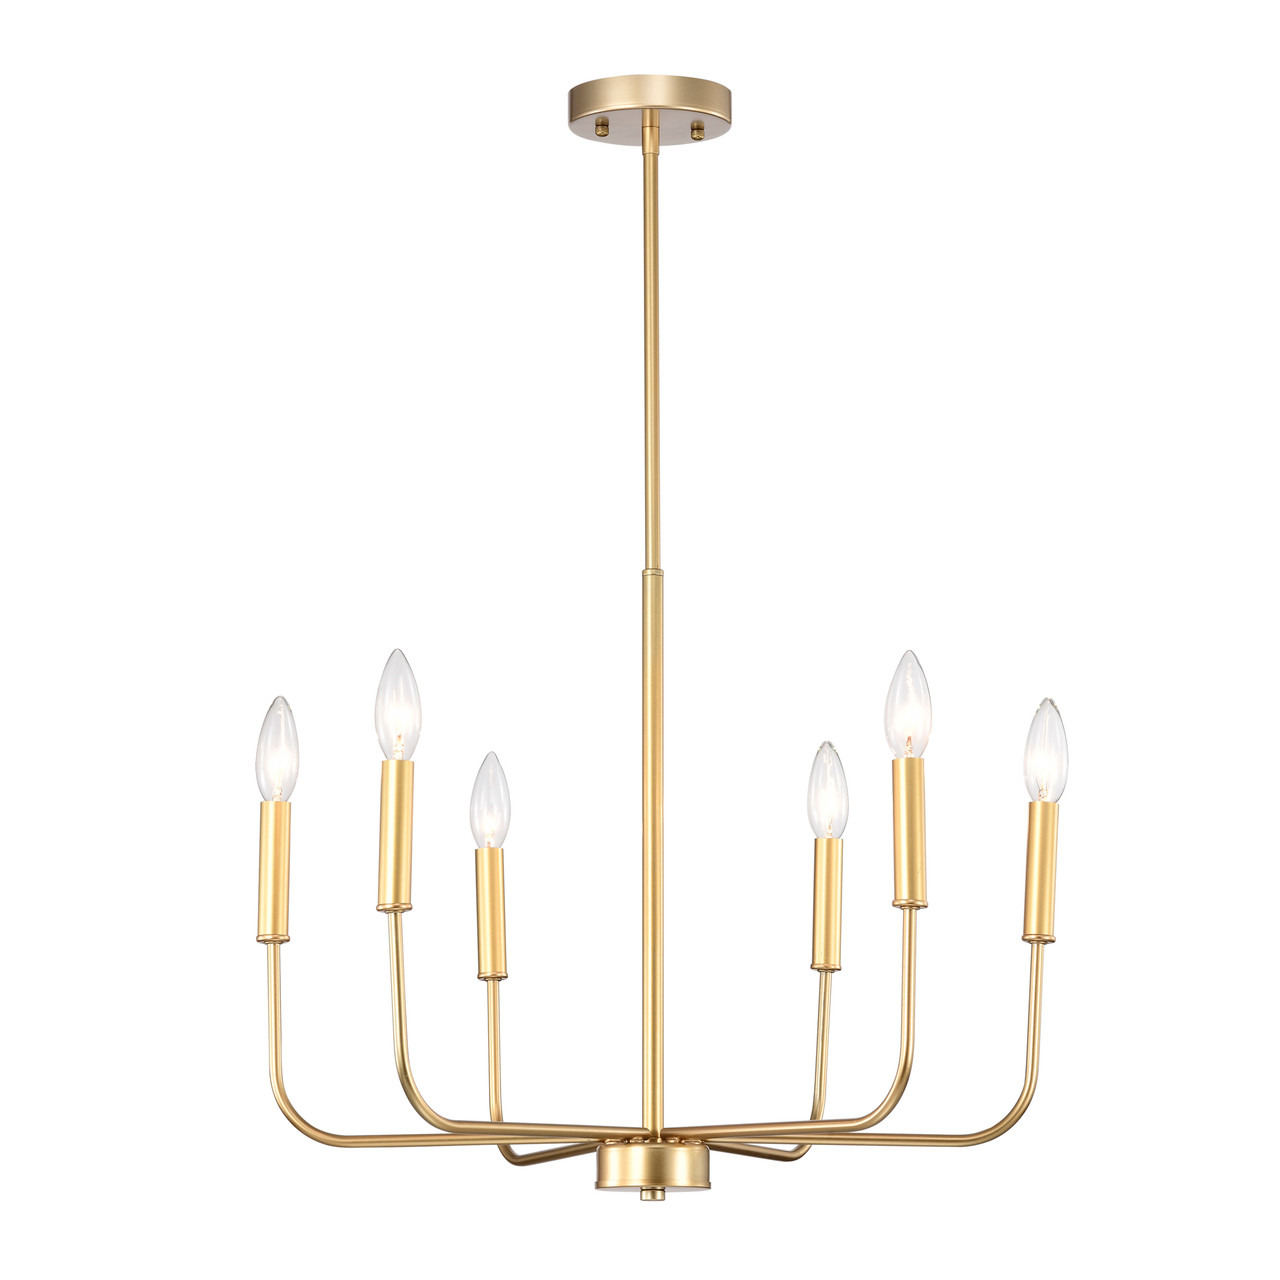 WAREHOUSE OF TIFFANY'S GD01-39MG Triona 22.1 in. 6-Light Indoor Matte Gold Finish Chandelier with Light Kit